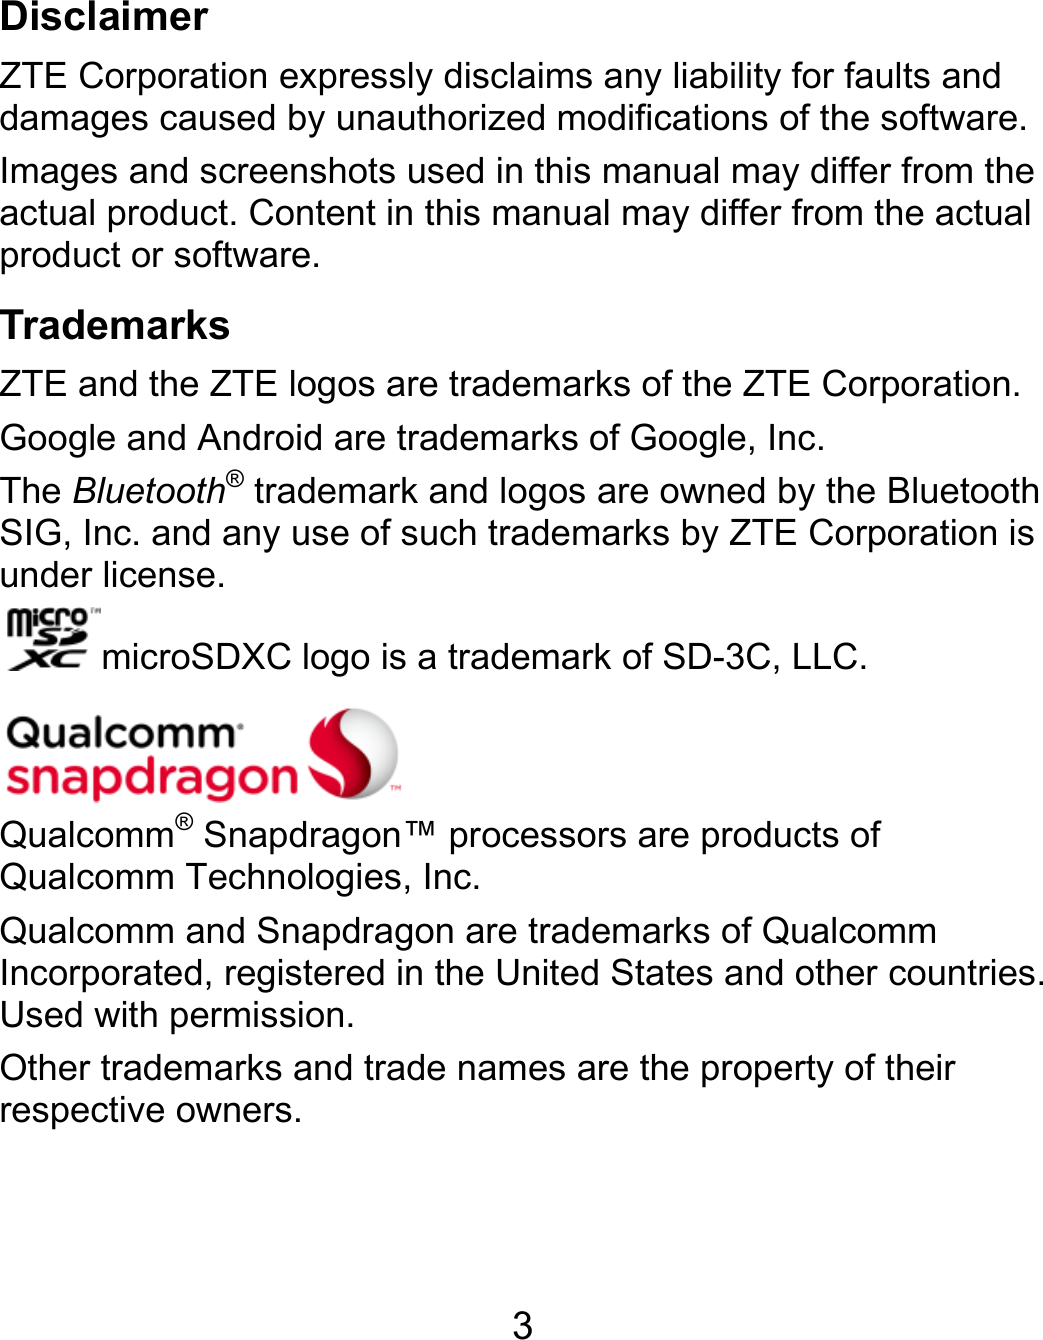  3 Disclaimer ZTE Corporation expressly disclaims any liability for faults and damages caused by unauthorized modifications of the software. Images and screenshots used in this manual may differ from the actual product. Content in this manual may differ from the actual product or software. Trademarks ZTE and the ZTE logos are trademarks of the ZTE Corporation. Google and Android are trademarks of Google, Inc. The Bluetooth® trademark and logos are owned by the Bluetooth SIG, Inc. and any use of such trademarks by ZTE Corporation is under license. microSDXC logo is a trademark of SD-3C, LLC.    Qualcomm® Snapdragon™ processors are products of Qualcomm Technologies, Inc.   Qualcomm and Snapdragon are trademarks of Qualcomm Incorporated, registered in the United States and other countries. Used with permission. Other trademarks and trade names are the property of their respective owners.   